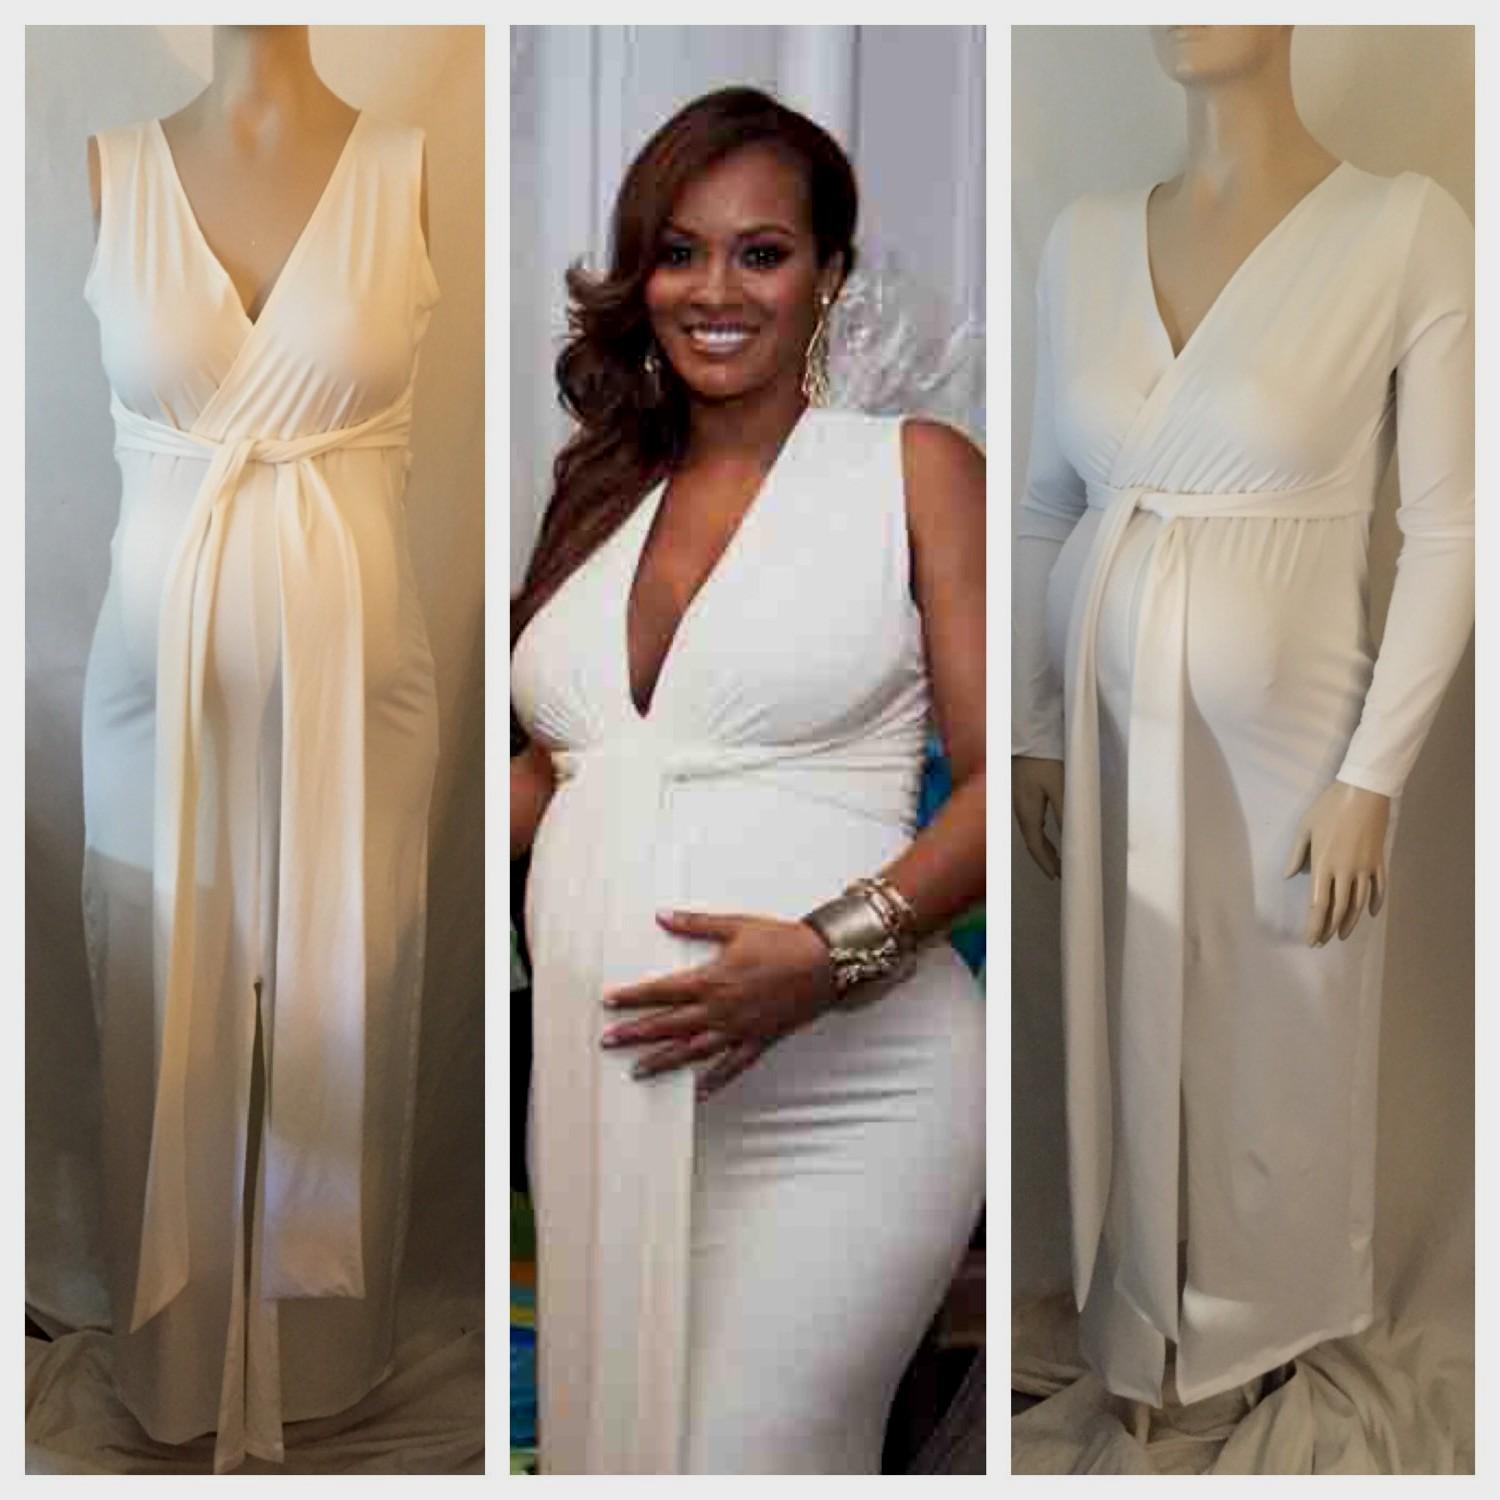 Full Size of Baby Shower:what Should I Wear To My Baby Shower Cute Baby Shower Outfits For Mom Stylish Maternity Dresses For Baby Shower Maternity Clothes Target Affordable Maternity Dresses For Baby Shower Long Maternity Dresses For Baby Shower Cheap Plus Size Maternity Clothes Baby Shower Dresses For Fall